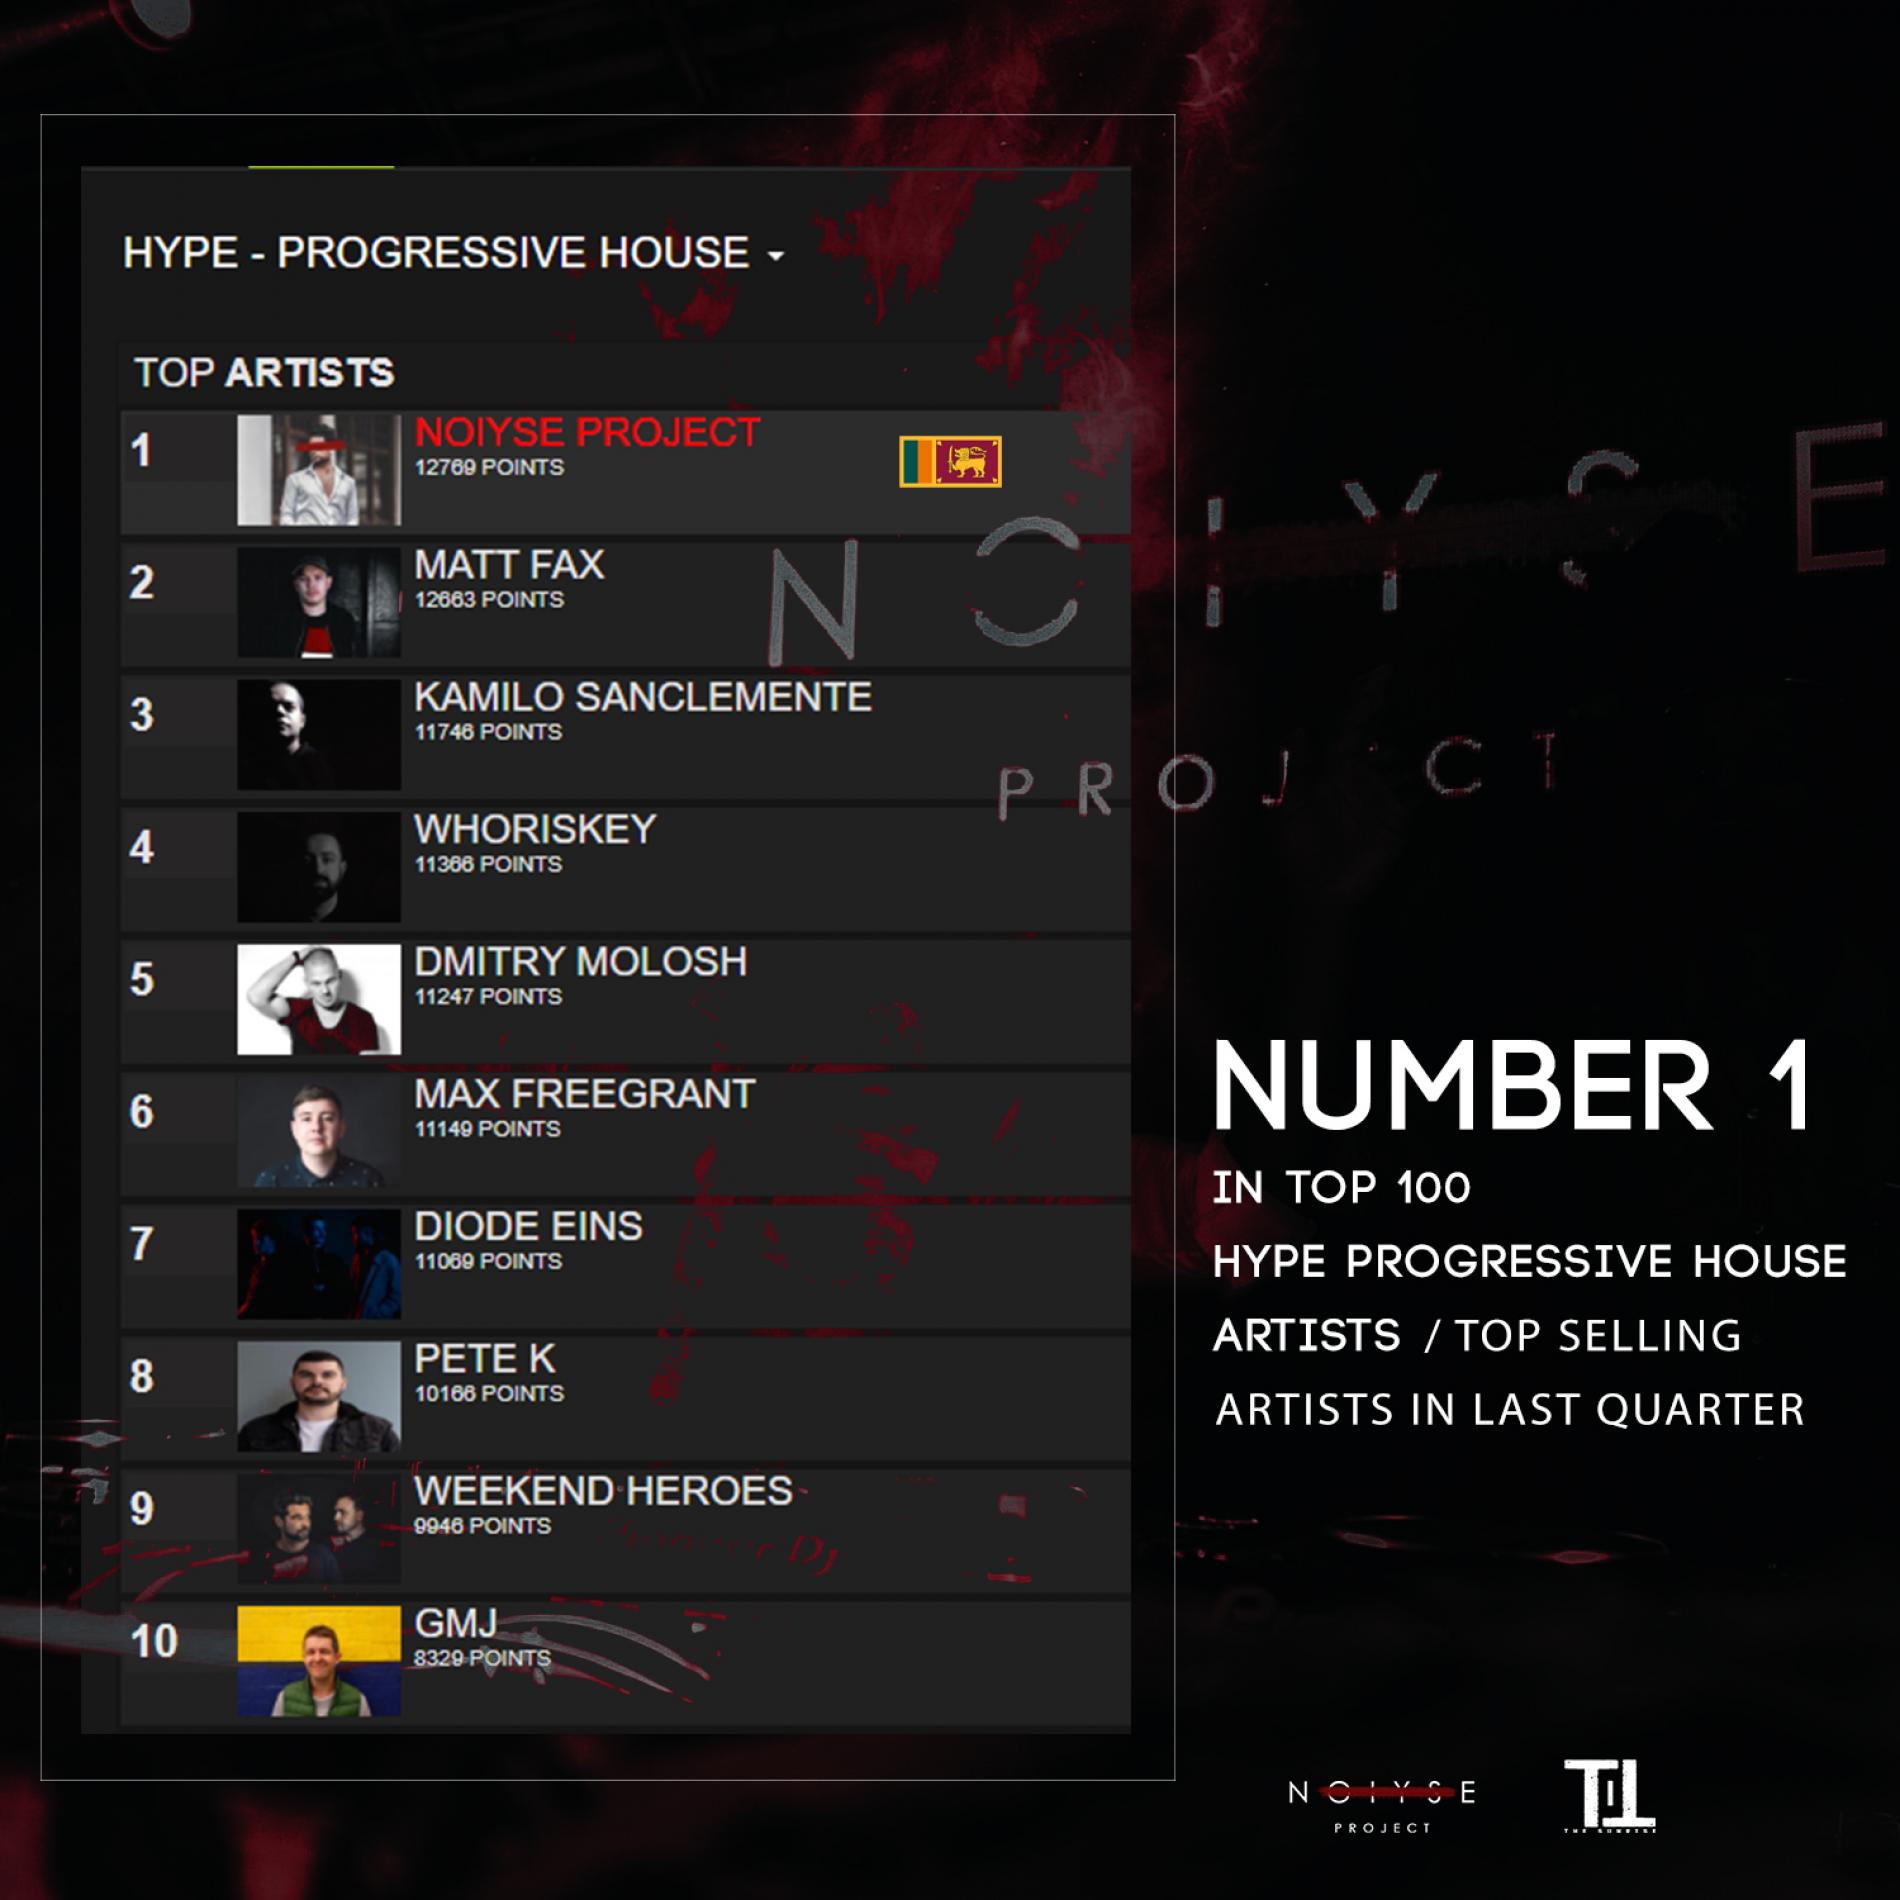 News : Noiyse Project Hits Number 1 On The Hype Progressive House Artist Chart!